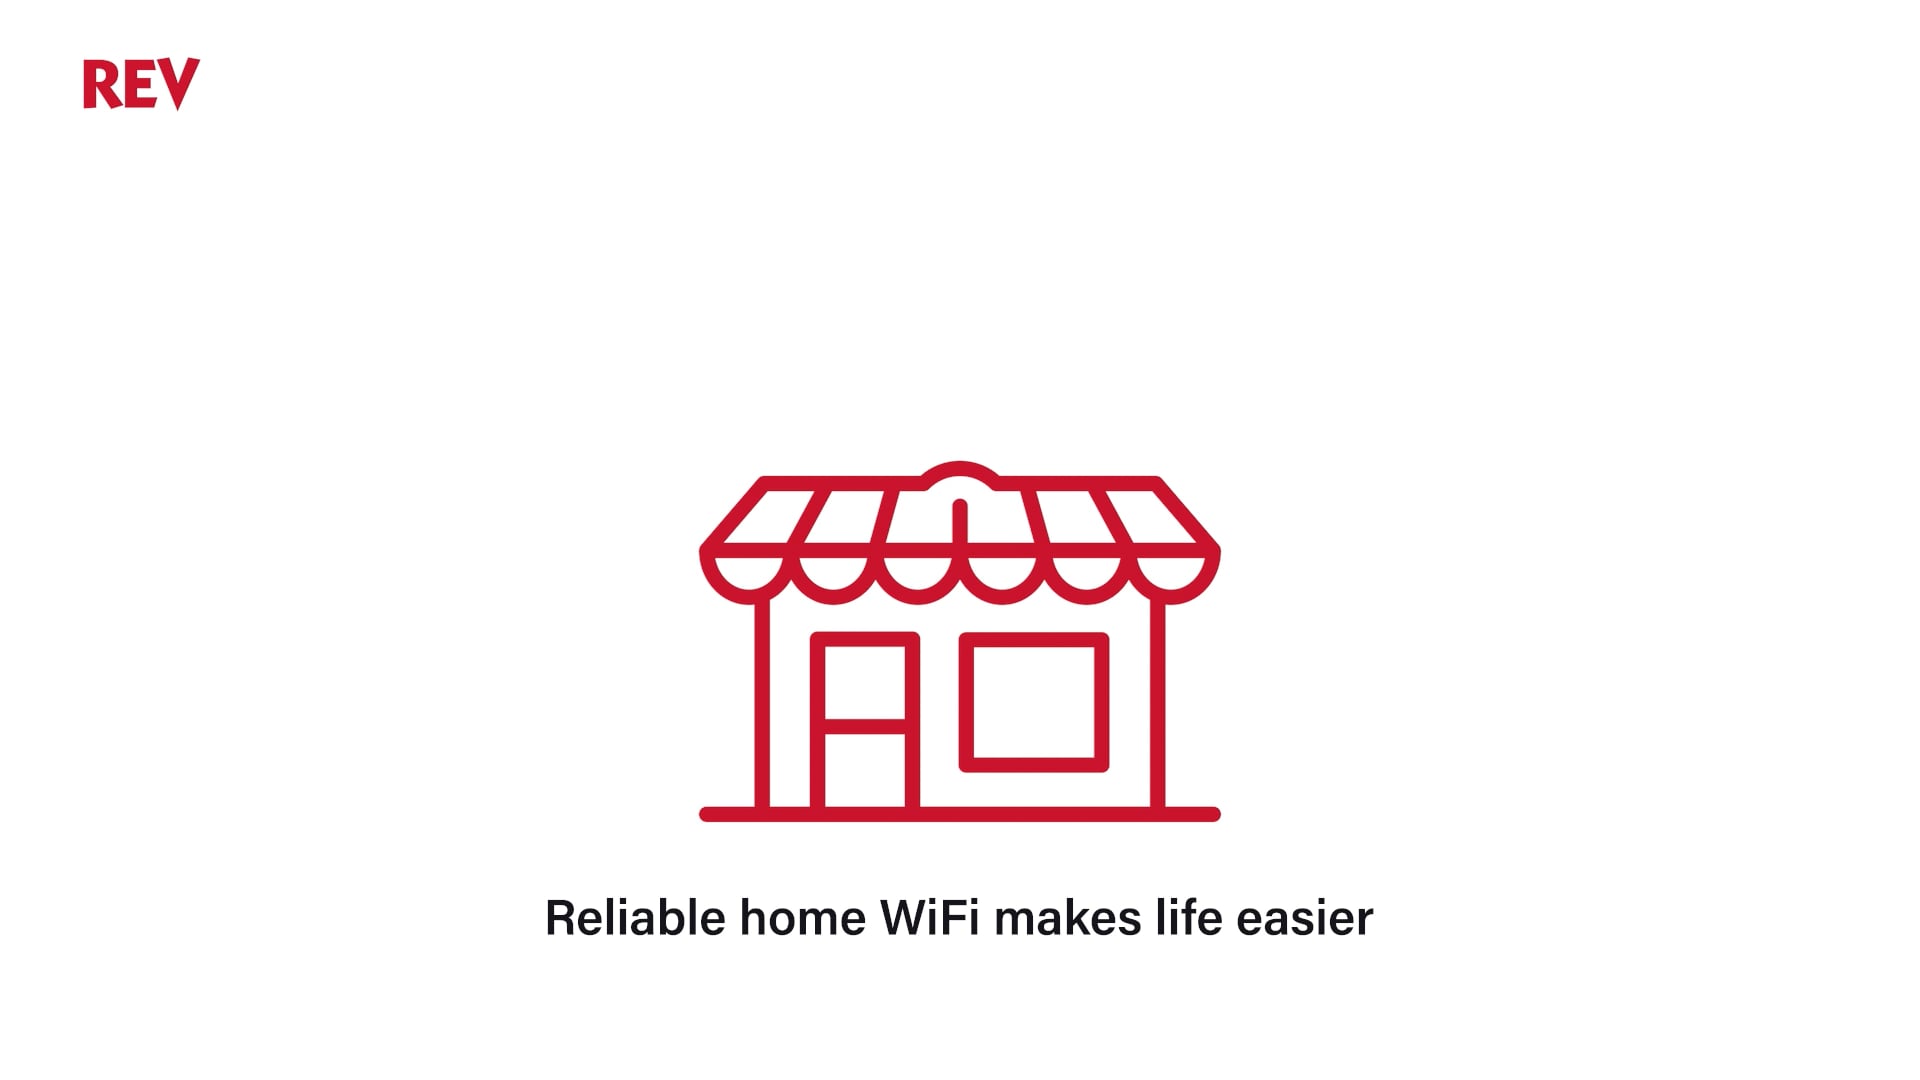 Rev - Wifi 101 - Coverage Where You Need It